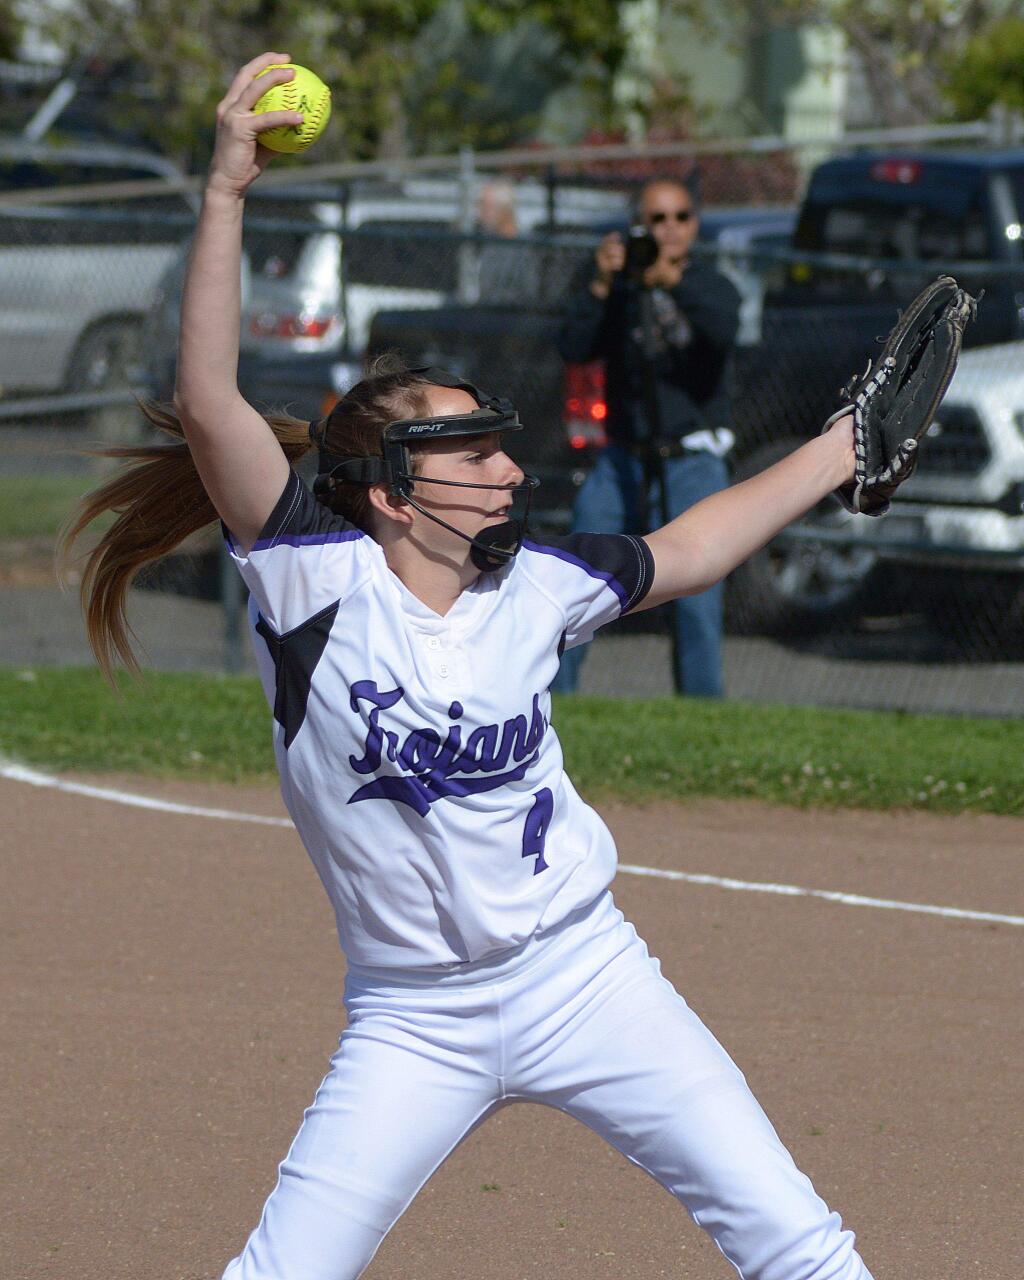 SUMNER FOWLER/FOR THE ARGUS-COURIERMindy O'Keefe helped pitch the T-Girls to third place in the prestigious Napa Tournament.